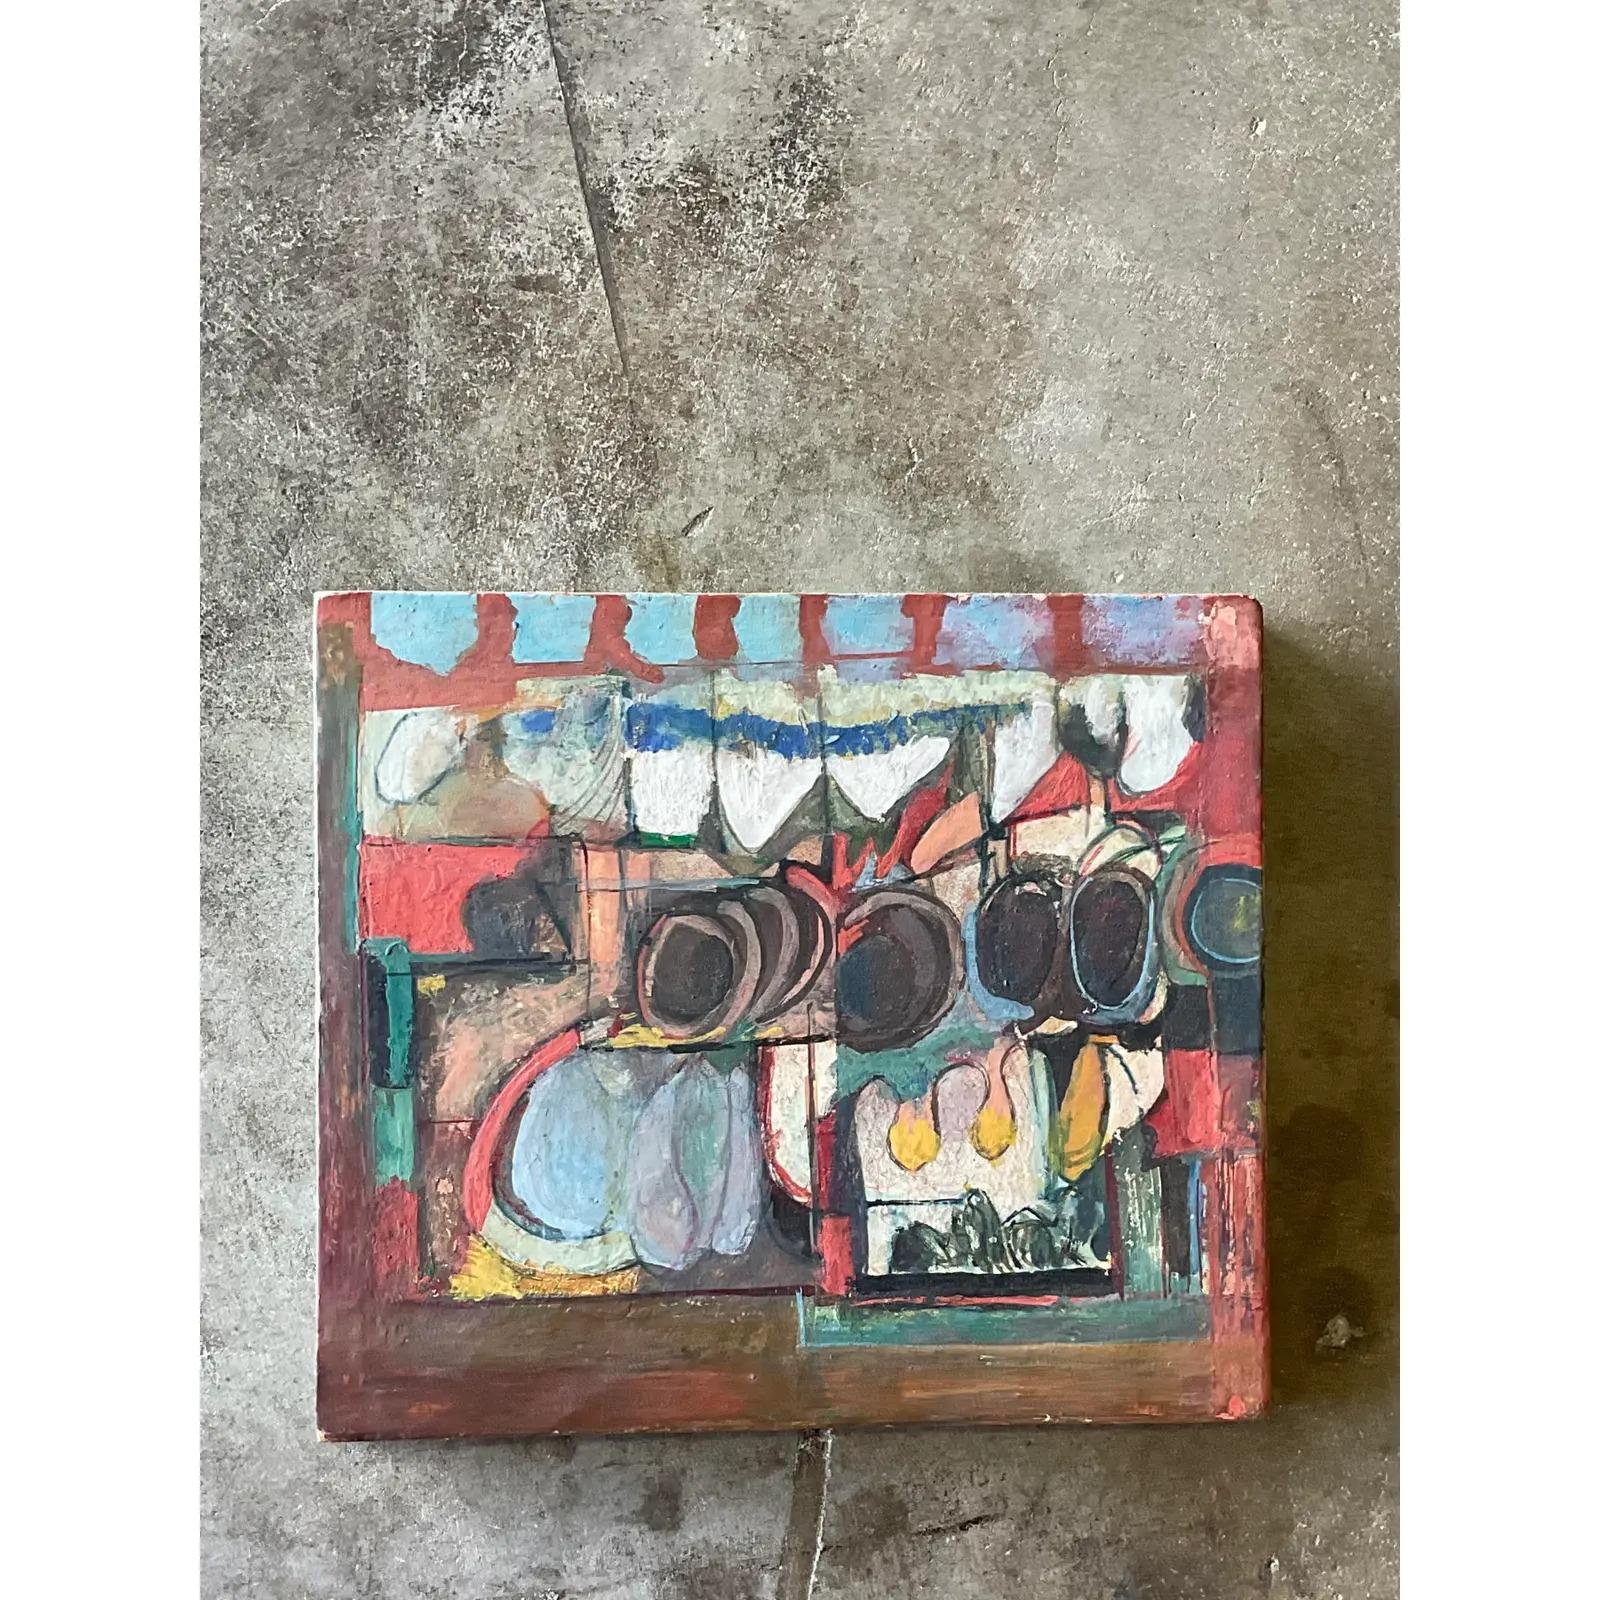 Fantastic vintage abstract original oil. A brilliantly colored composition on wood. Signed and dated by the artist Jack Hammack, 1967. Acquired from a Portland estate.